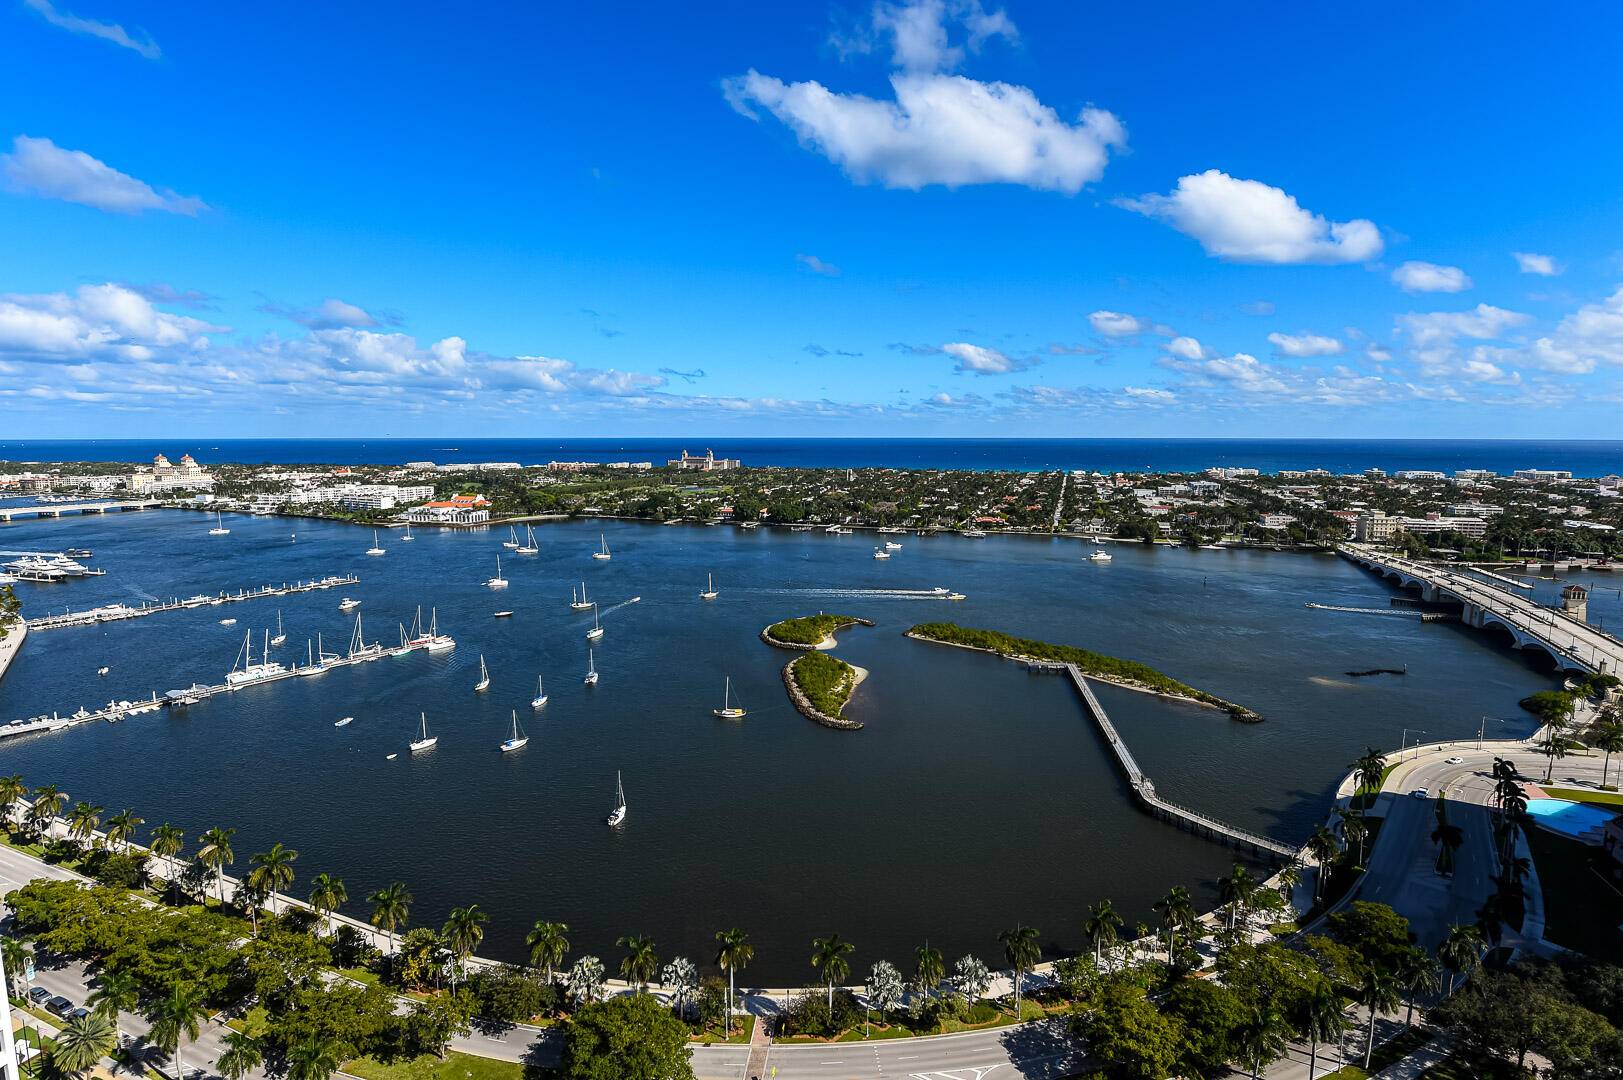 EXCEPTIONAL, STUNNING rare and unique 33rd floor grand penthouse apartment with unparalleled, unobstructed ocean and intracoastal views !